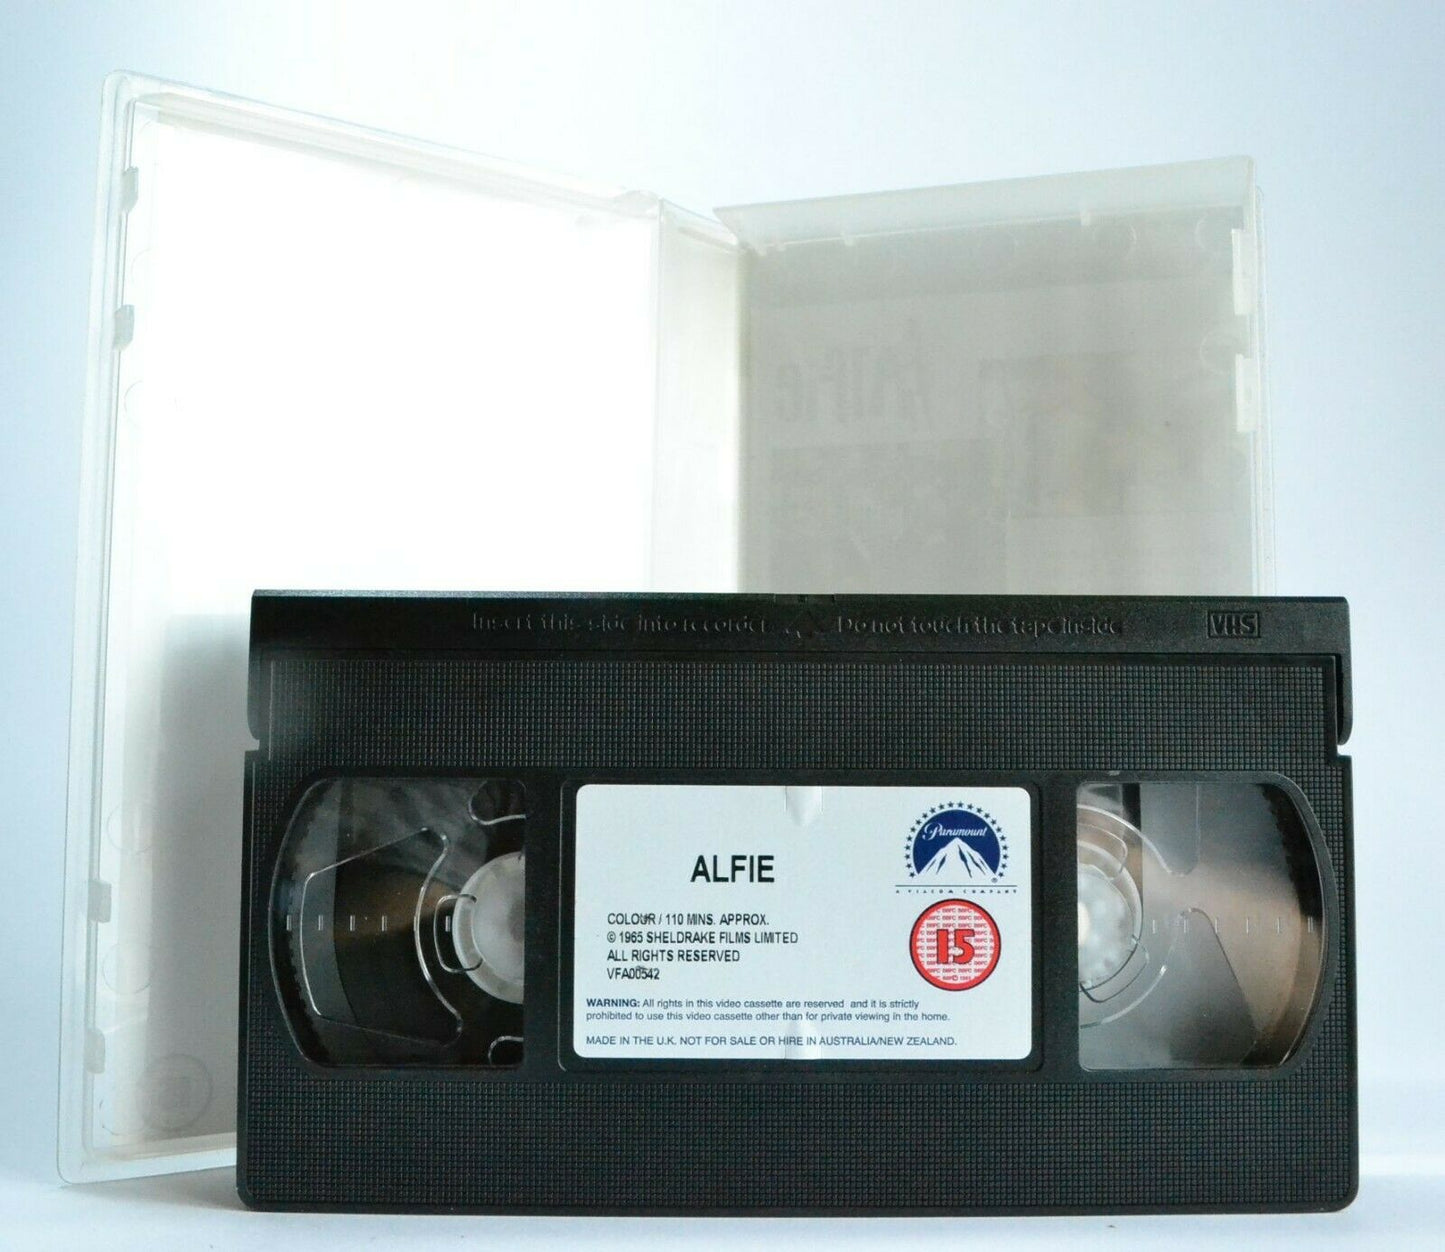 Alfie (1965): Digitally Remastered - Comedy - Michael Caine/Julia Foster - VHS-